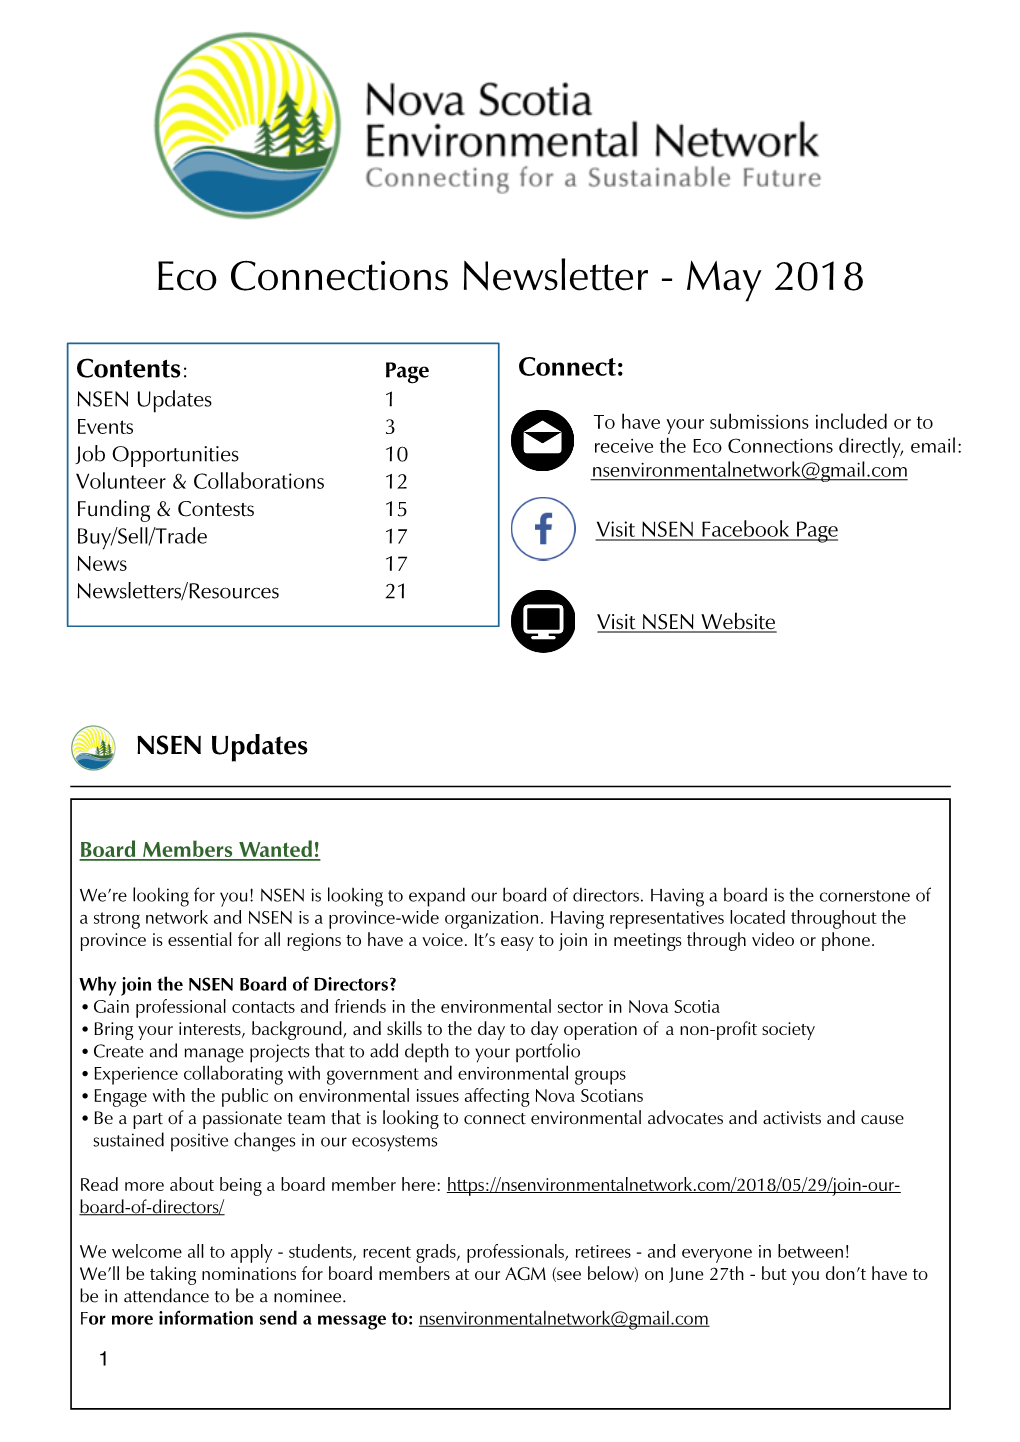 Eco-Connections Newsletter May 2018